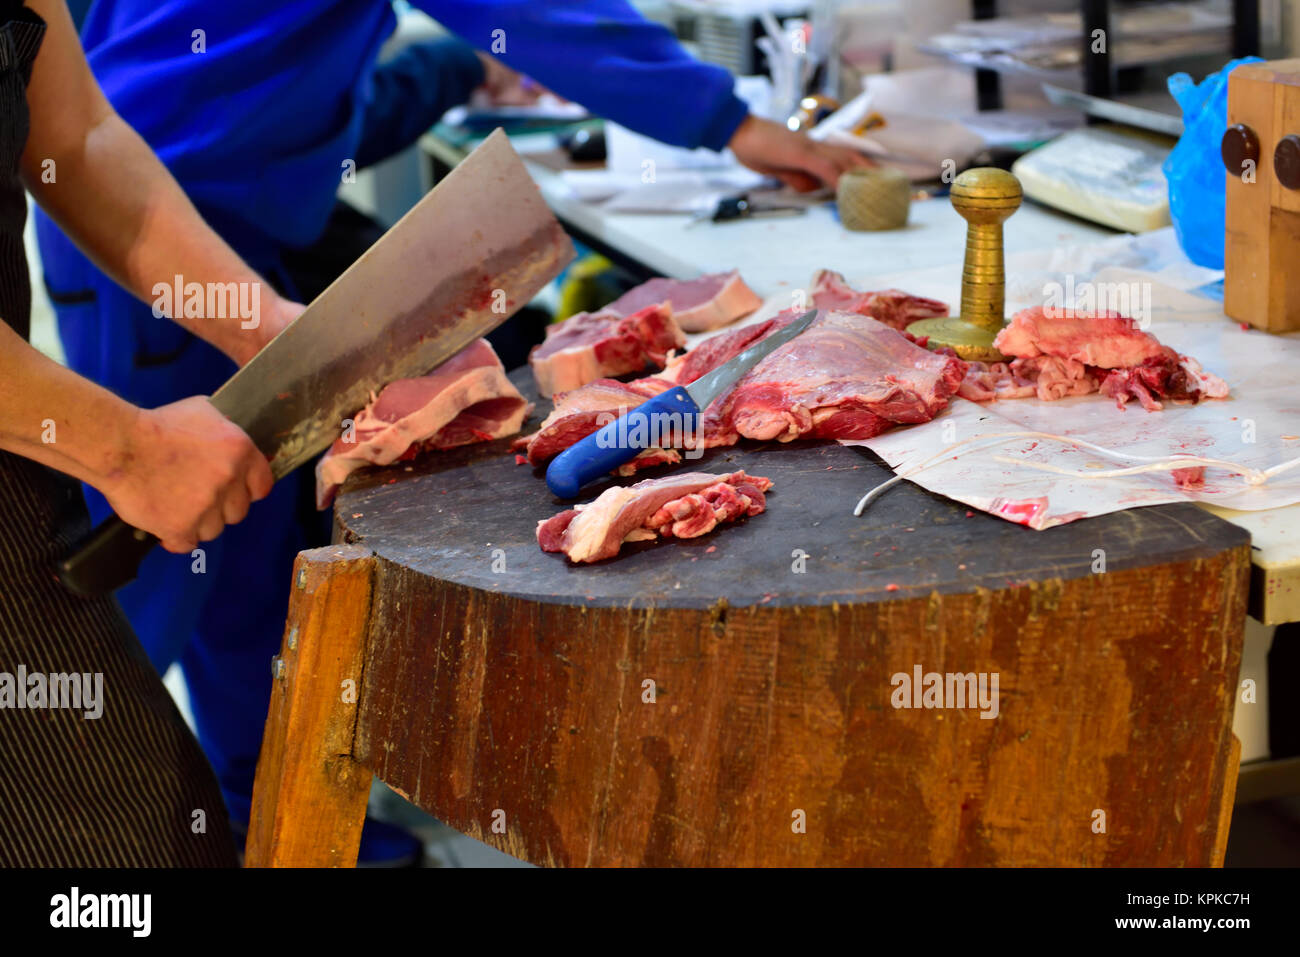 Butcher using cleaver to cut up meat on butchers block in Athens Central Meat Market, Greece Stock Photo